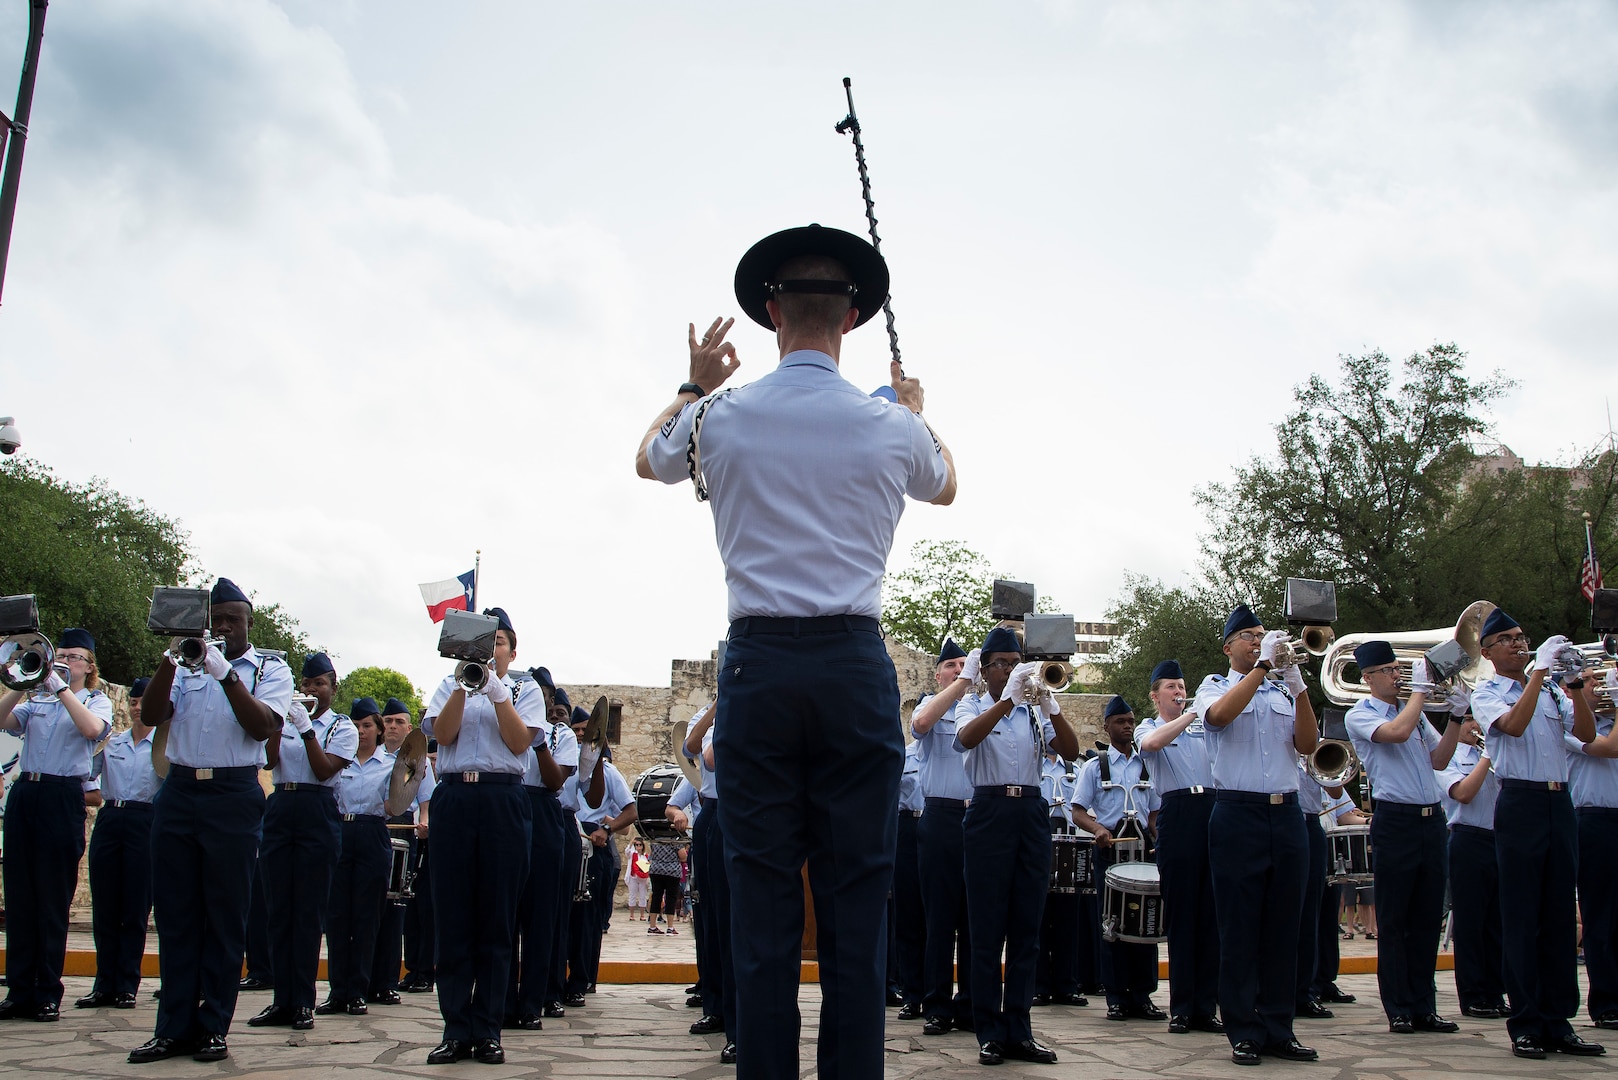 Joint Base San Antonio-Lackland Drum and Bugle Corps, comprised of JBSA-Lackland basic military trainees, perform during San Antonio’s Fiesta Air Force Day at the Alamo, April 22, 2019. From its beginning in 1891, Fiesta has grown into an annual celebration that includes civic and military observances, street and river parades, exhibits, pilgrimages and memorials.